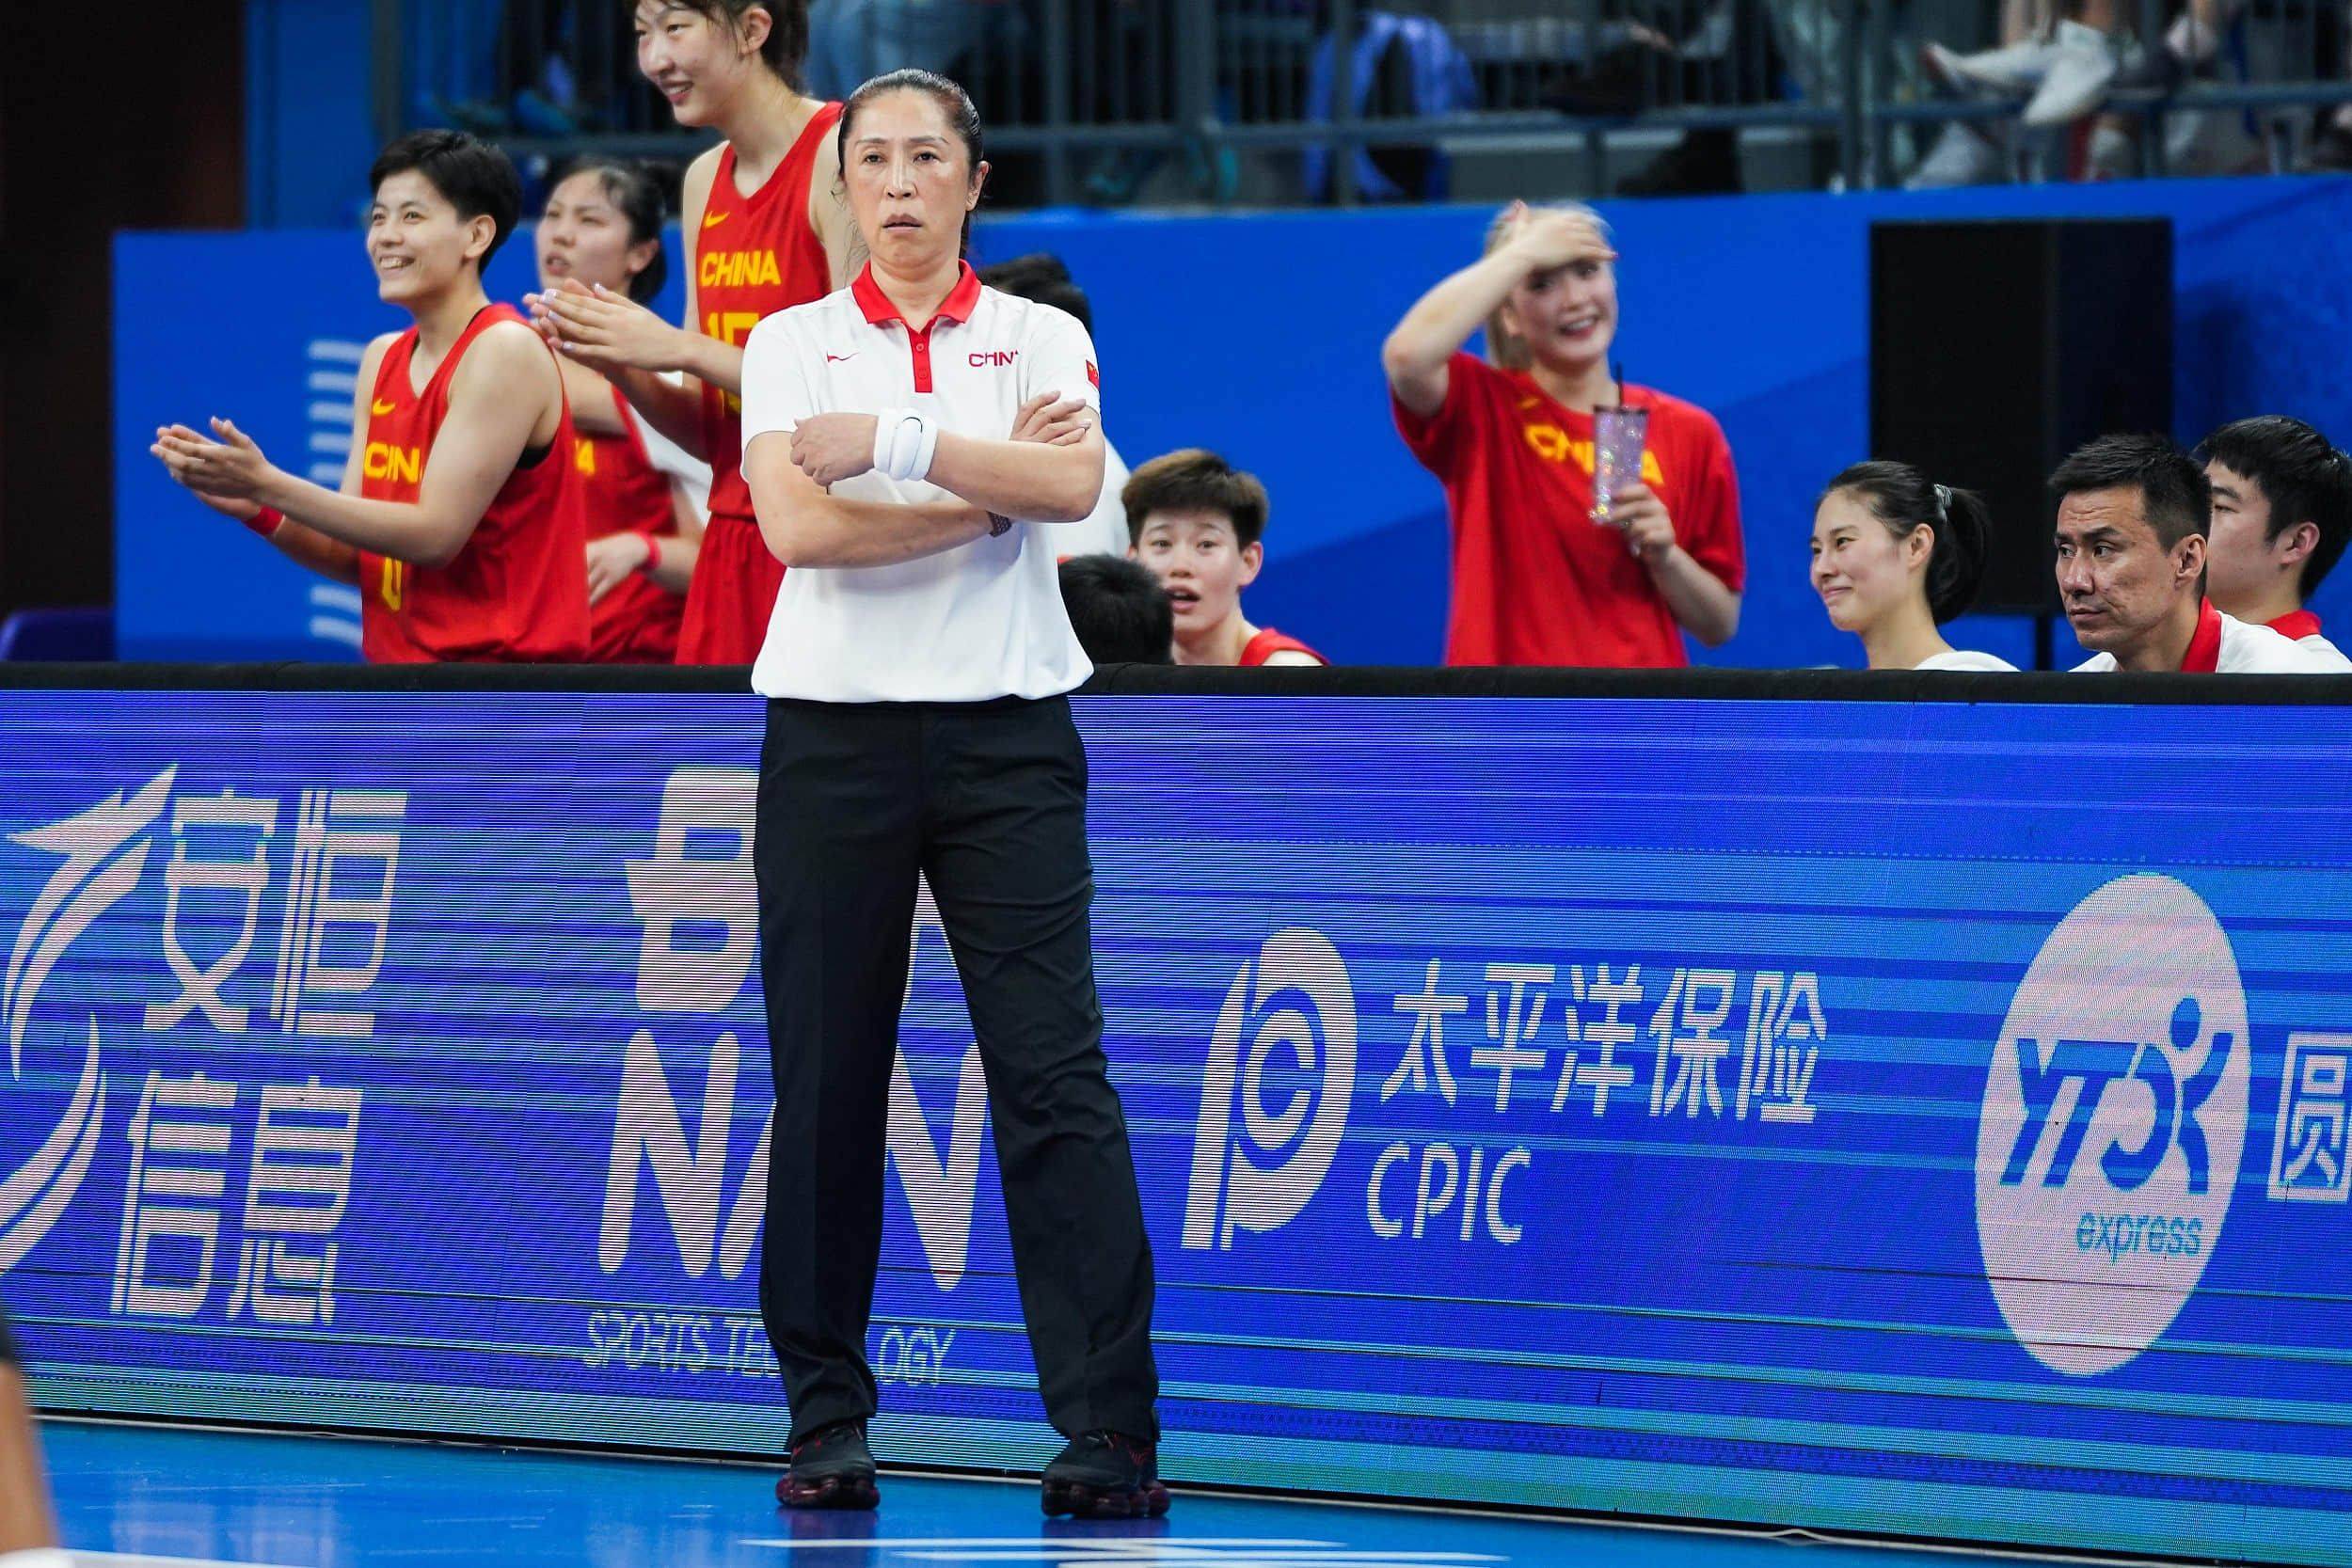 Media Outlines Three Issues for Chinese Women's Basketball Team: Defense, Three-Point Shooting, and Guard Play